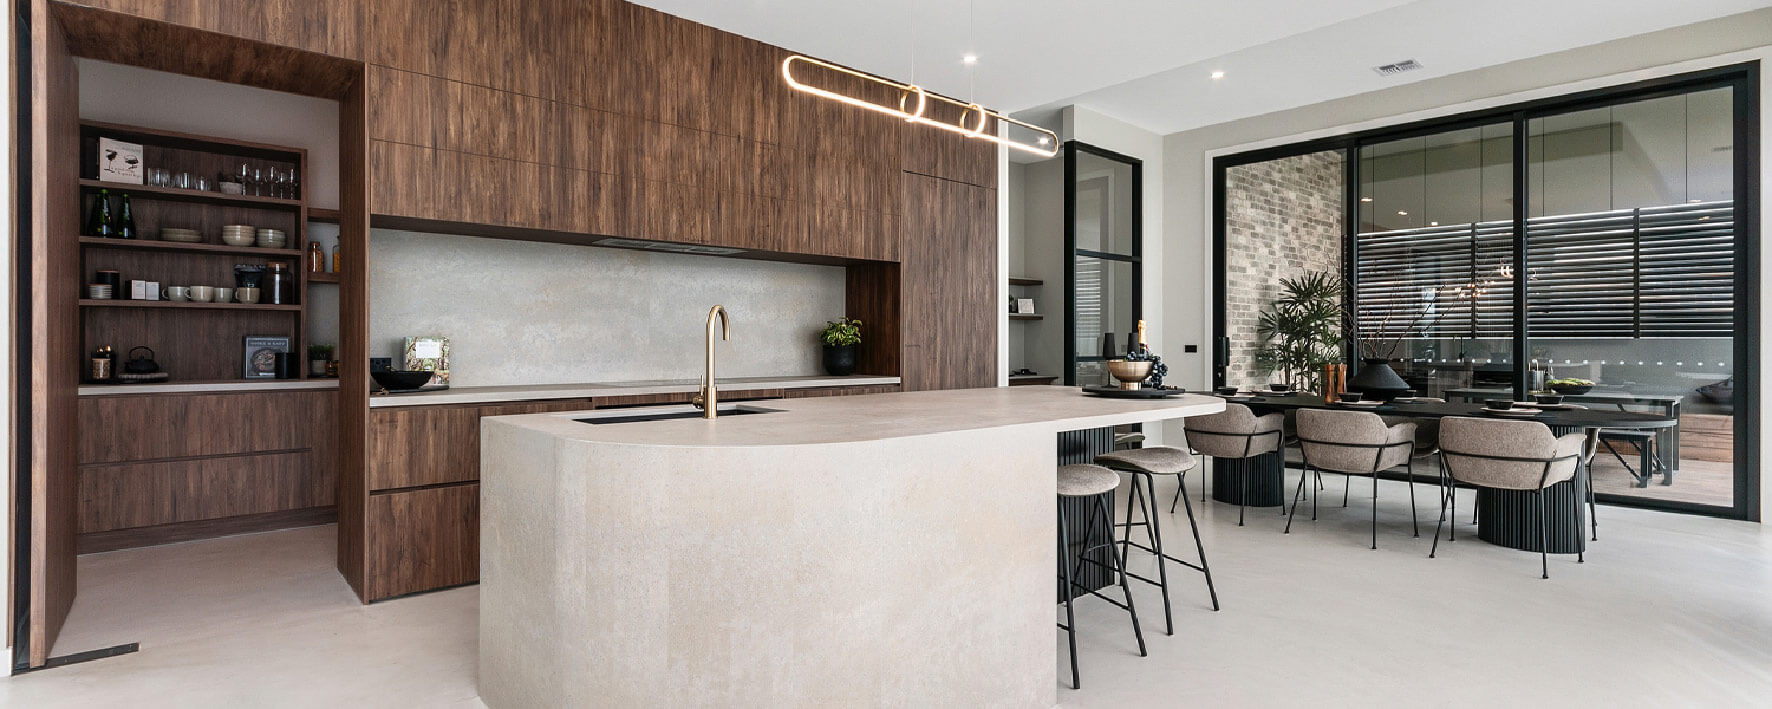 Timber and stone kitchen of Display Home by Virtue Homes